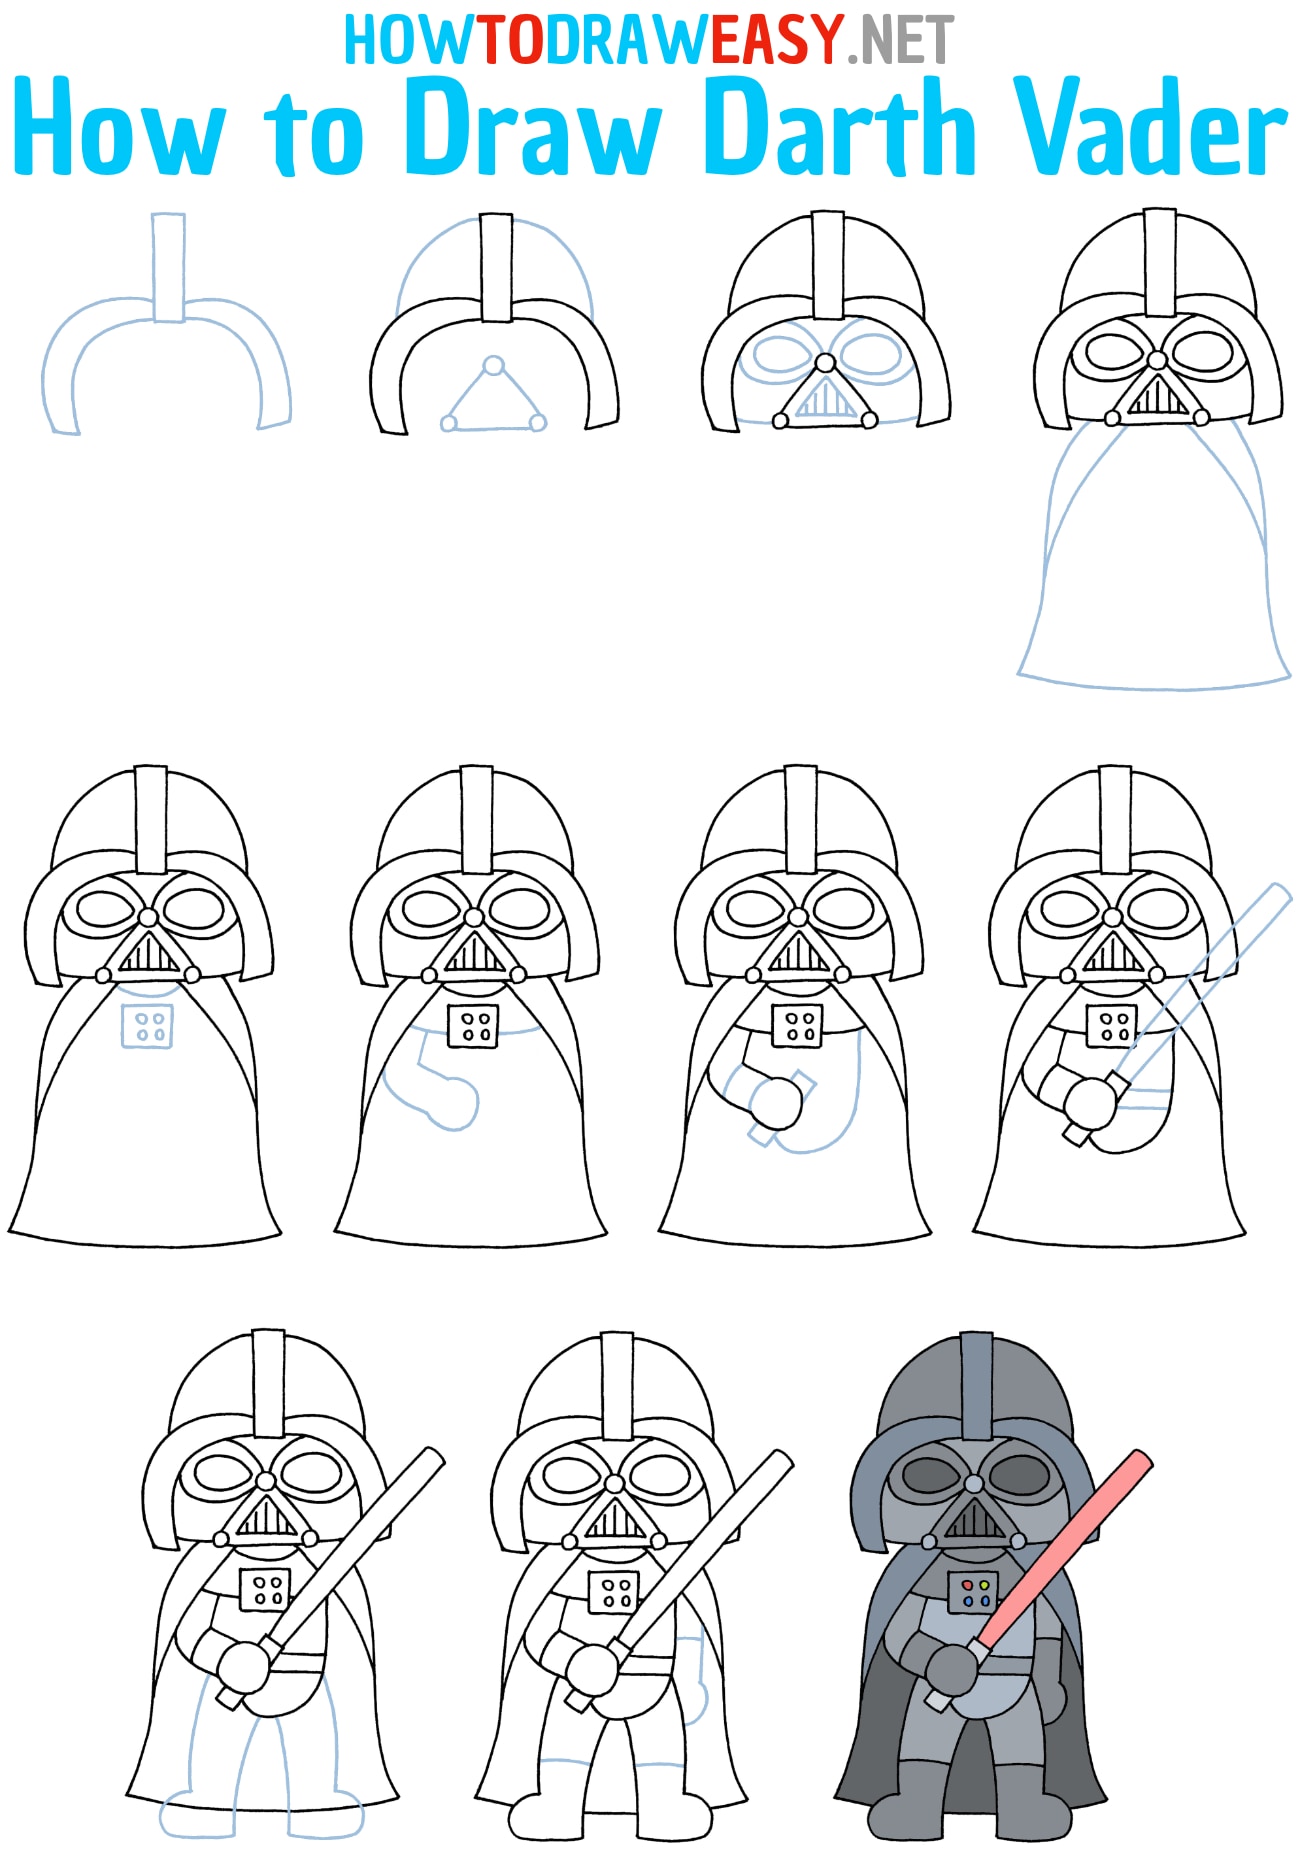 How to Draw Darth Vader Step by Step